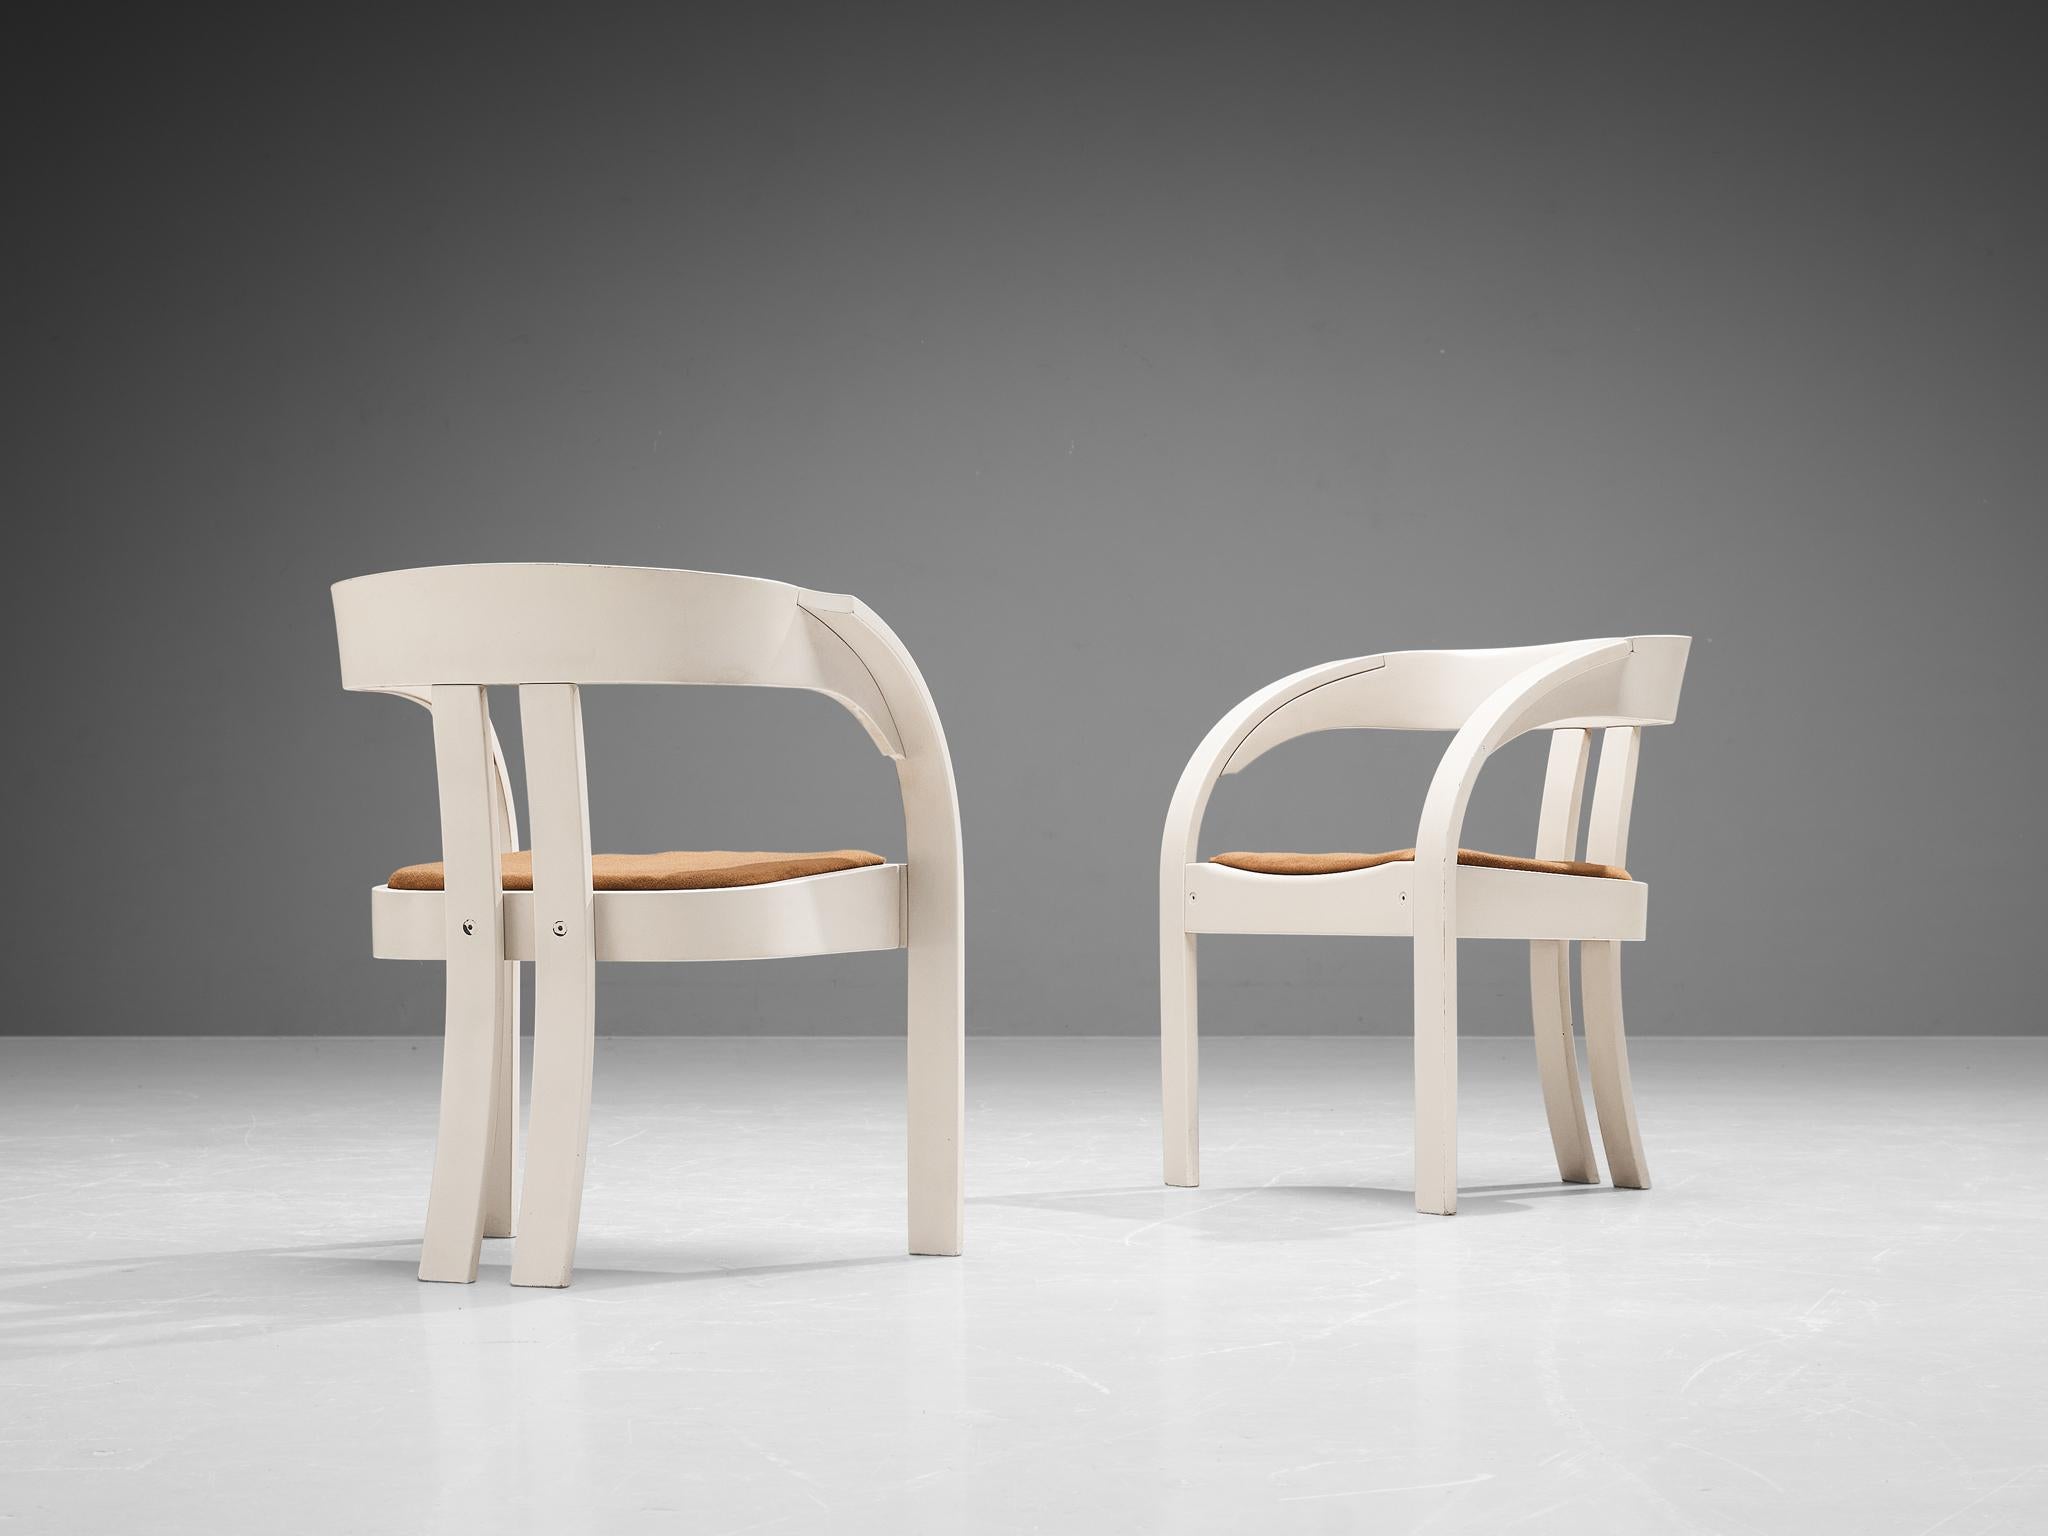 Giovanni Battista Bassi for Poltronova, pair of 'Elisa' chairs, fabric, lacquered wood, Italy, 1960s 

These wonderfully constructed chairs are based on a solid construction where clear, fluent lines are allowed to emerge in the design. Note how the